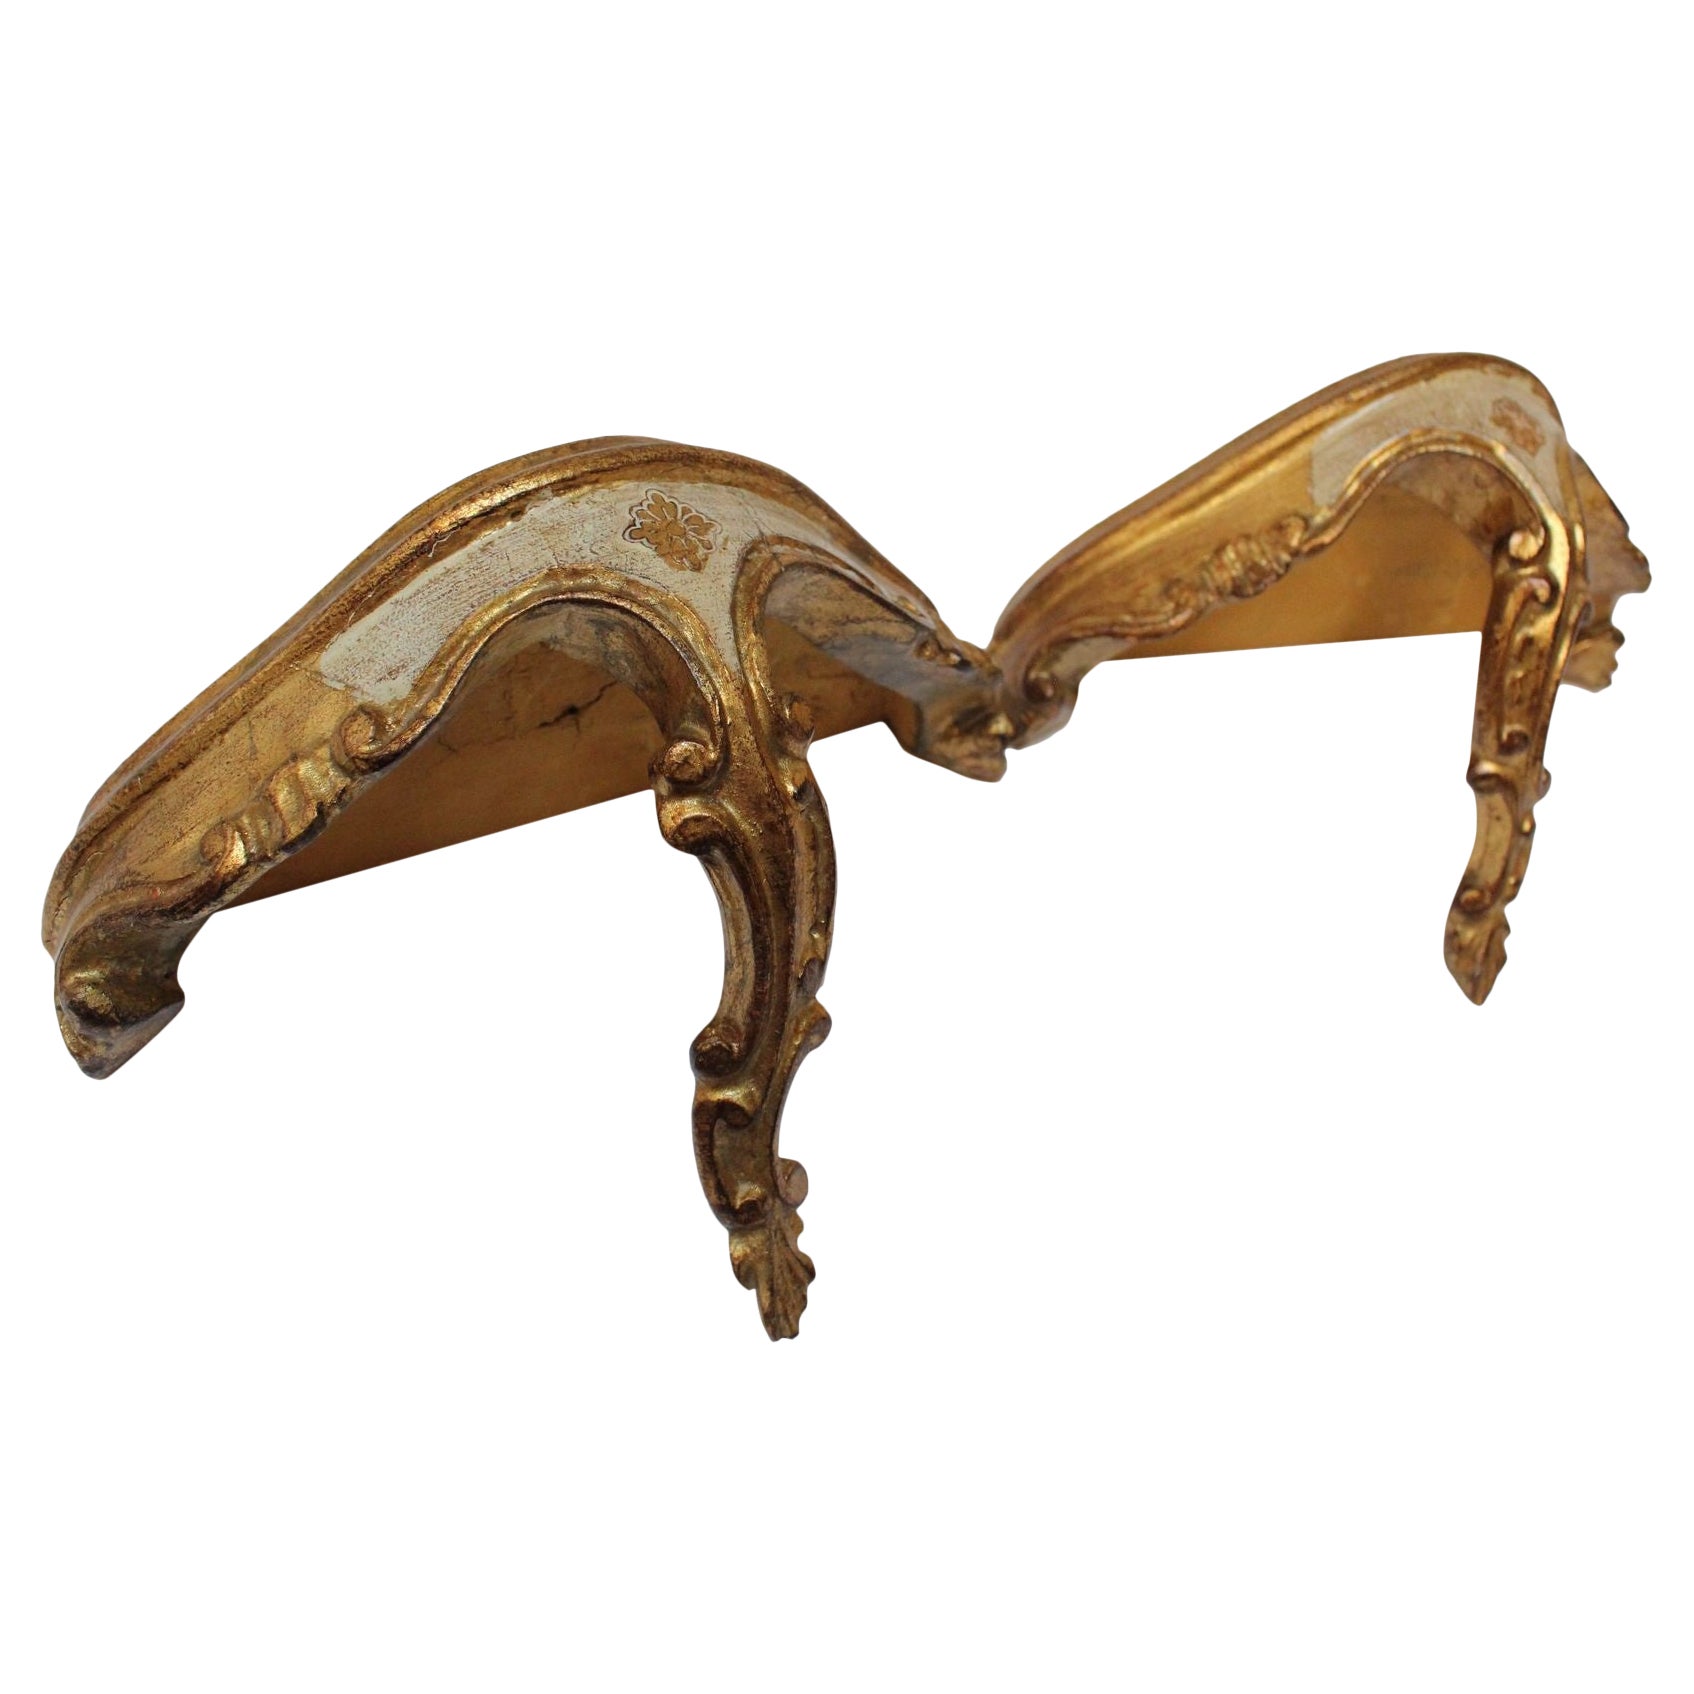 Pair of Vintage Florentine Giltwood Wall Brackets/Shelves with Rocaille Flourish For Sale